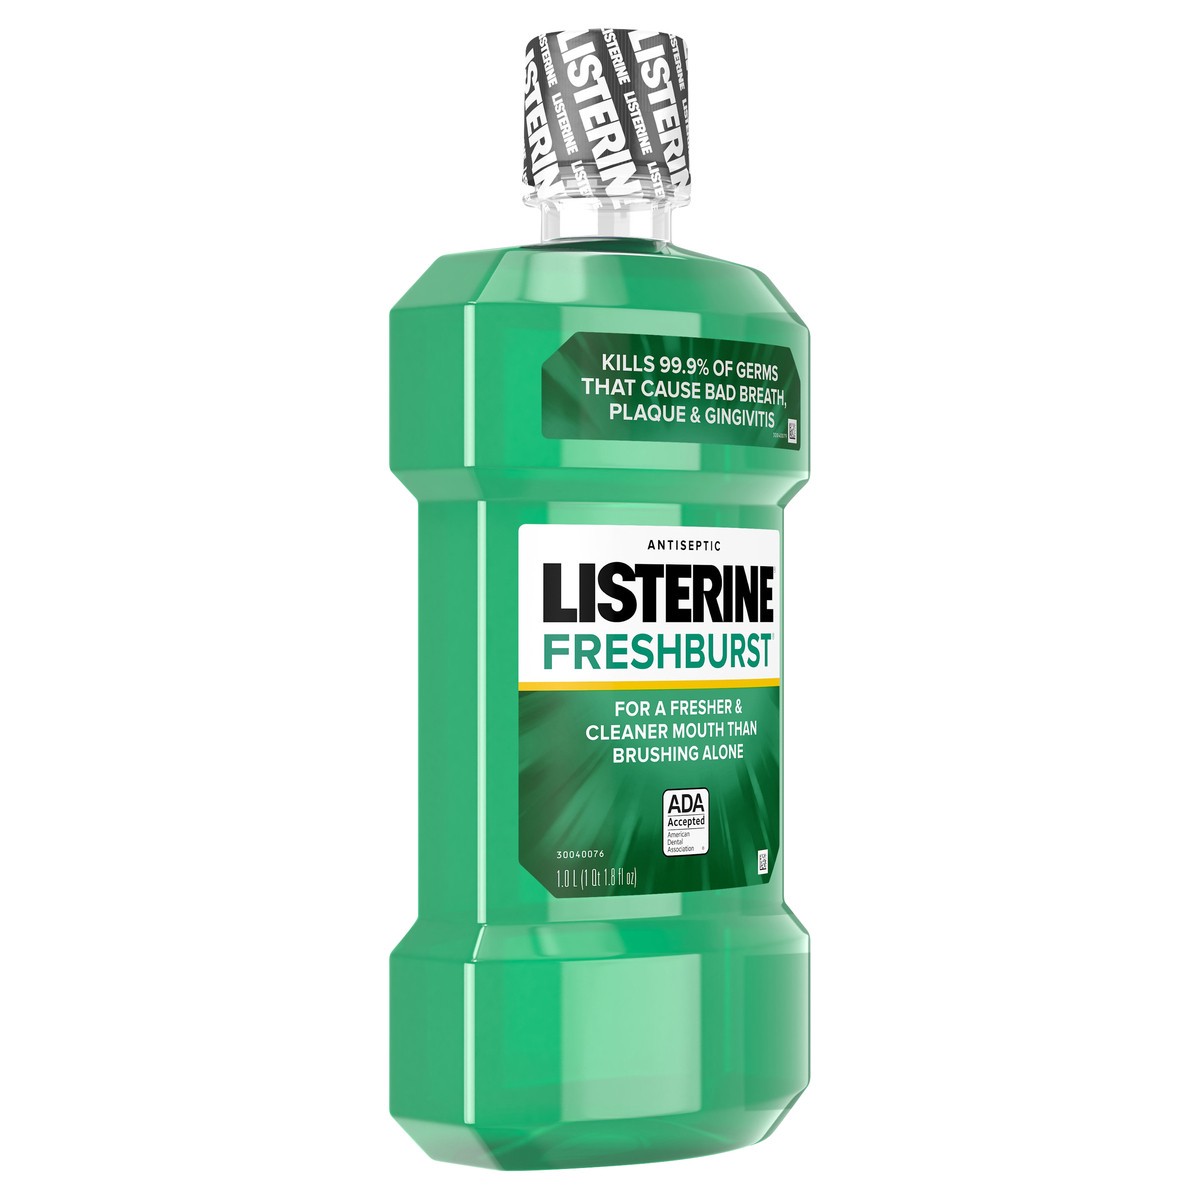 slide 2 of 6, Listerine Freshburst Antiseptic Mouthwash for Bad Breath, Kills 99% of Germs that Cause Bad Breath & Fight Plaque & Gingivitis, ADA Accepted Mouthwash, Spearmint, 1 L, 1 liter